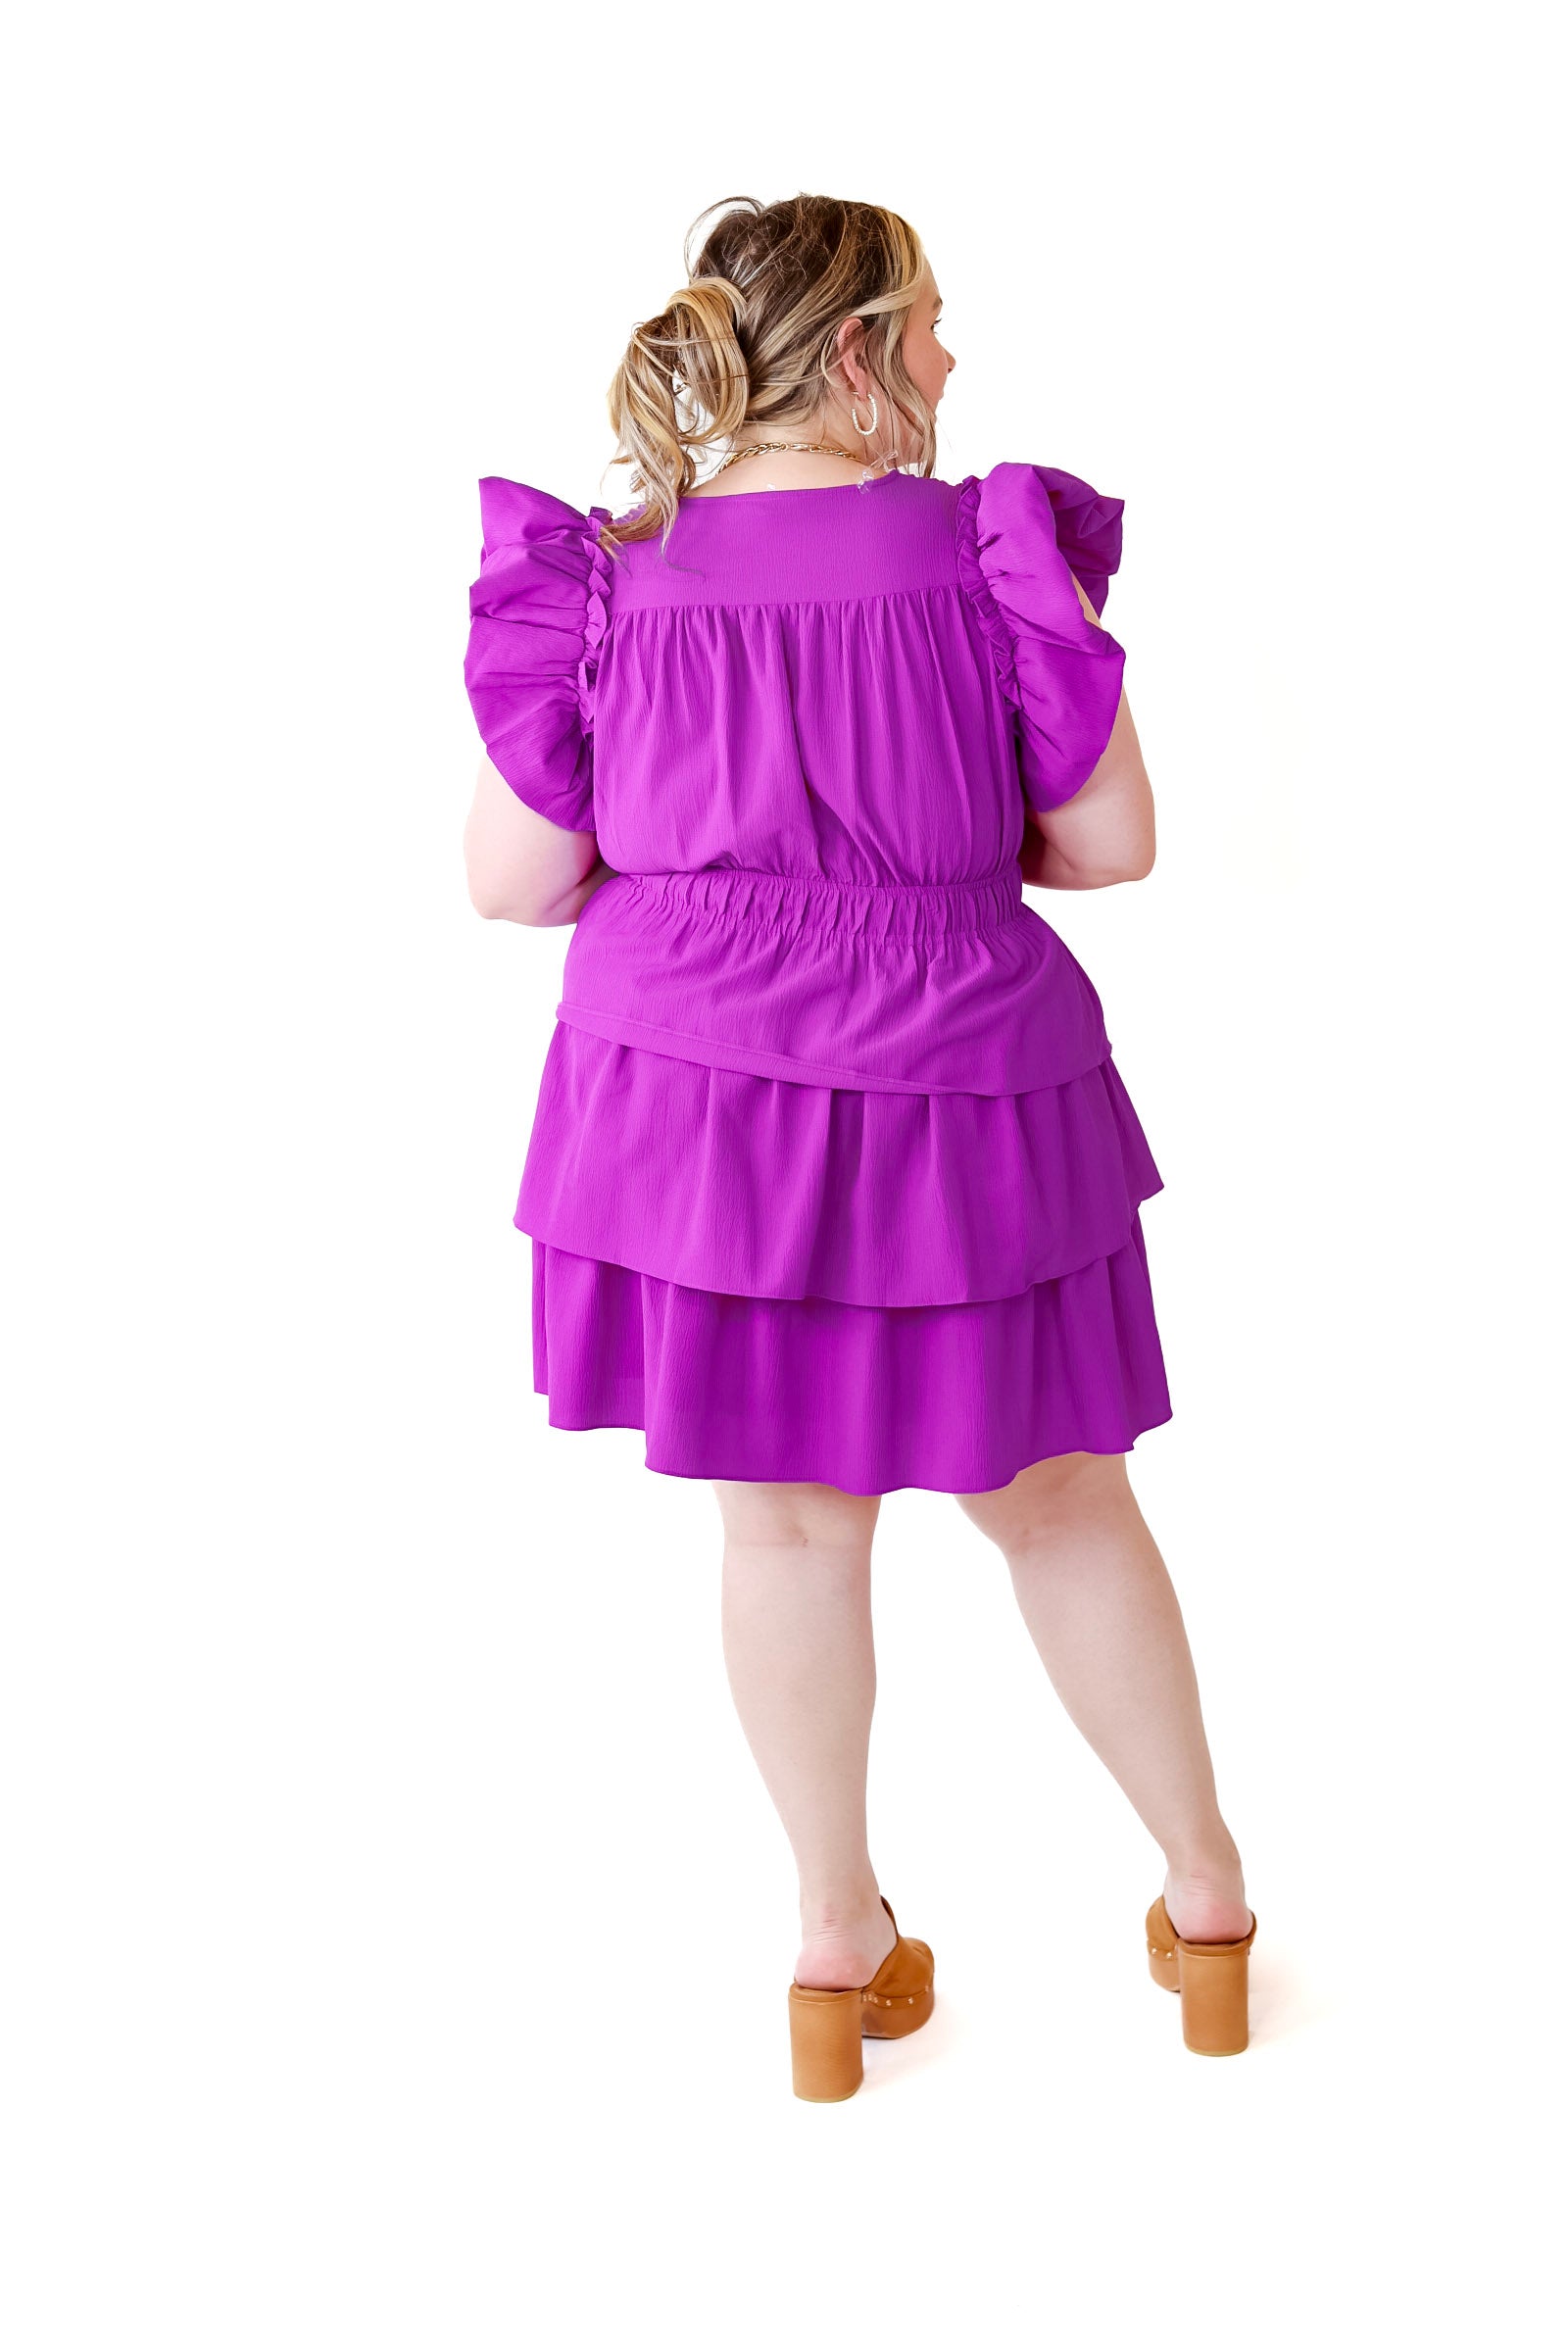 The Perfect Night Ruffle Cap Sleeve Dress in Violet Purple - Giddy Up Glamour Boutique